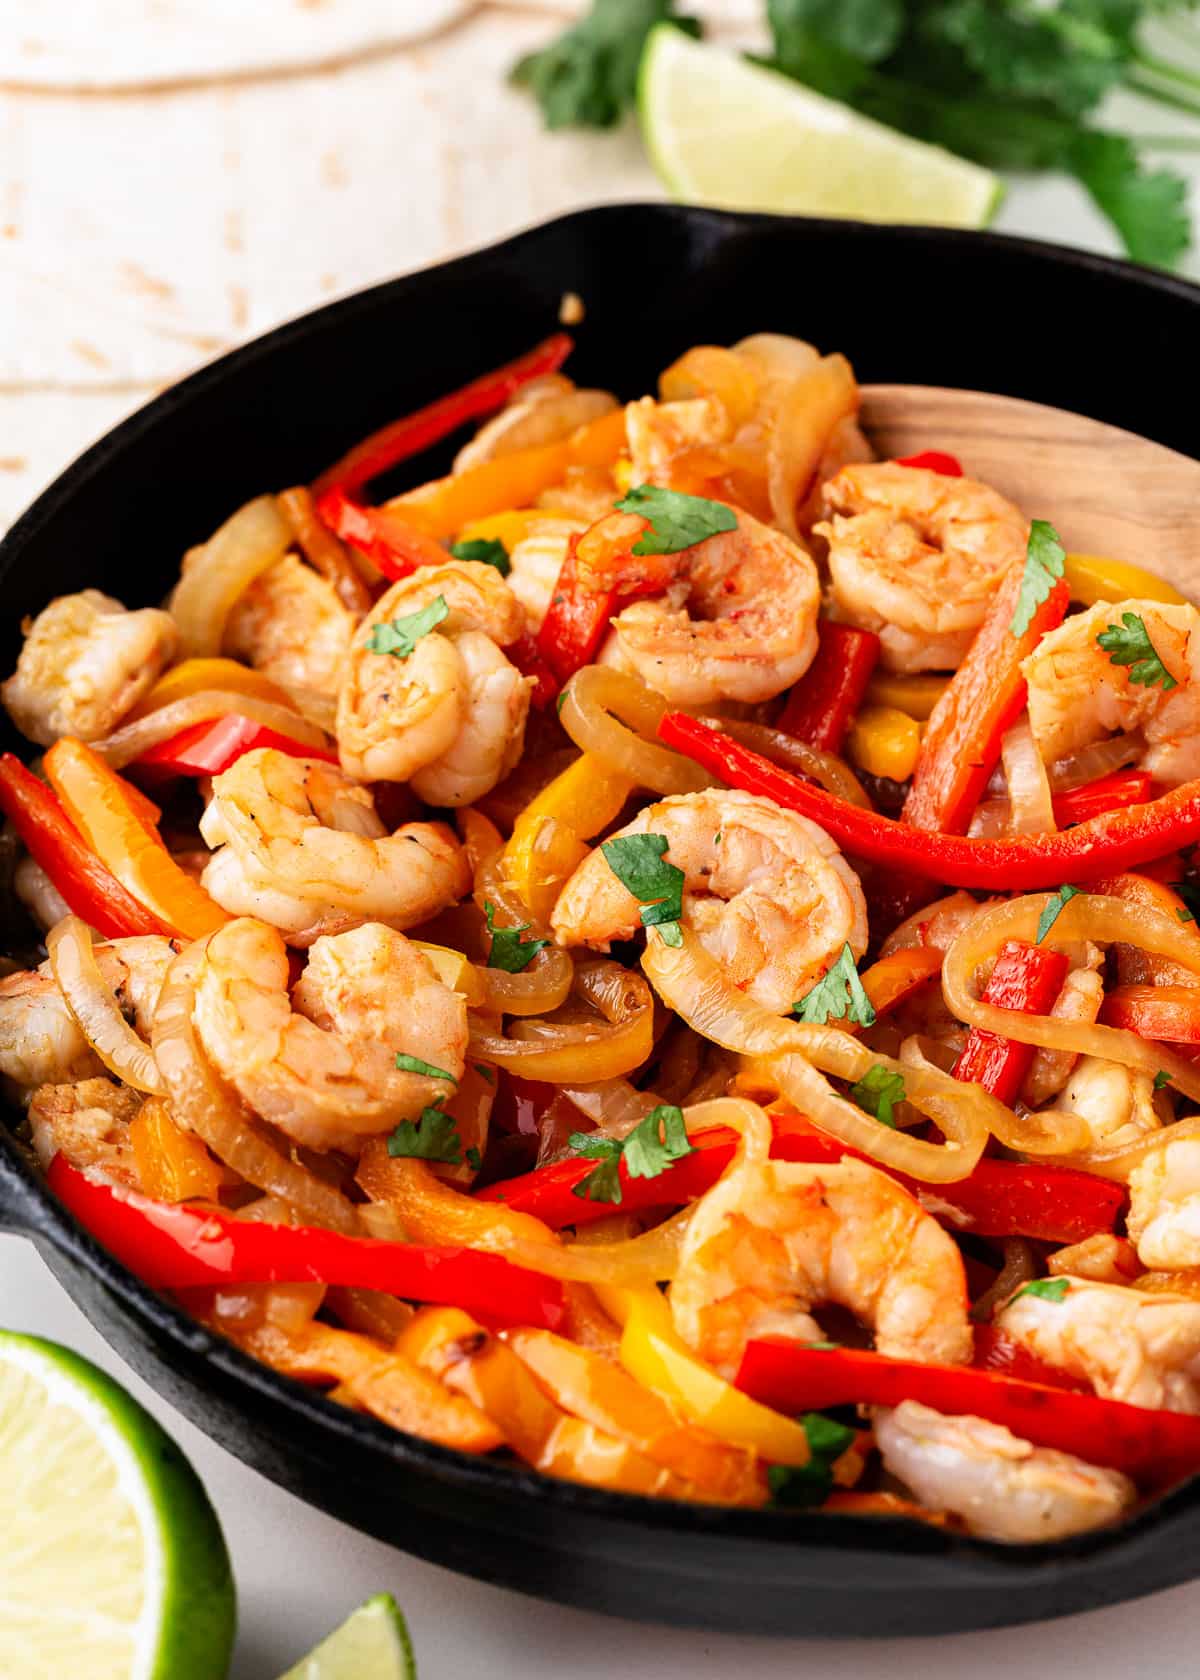 Shrimp fajitas and peppers in a skillet.